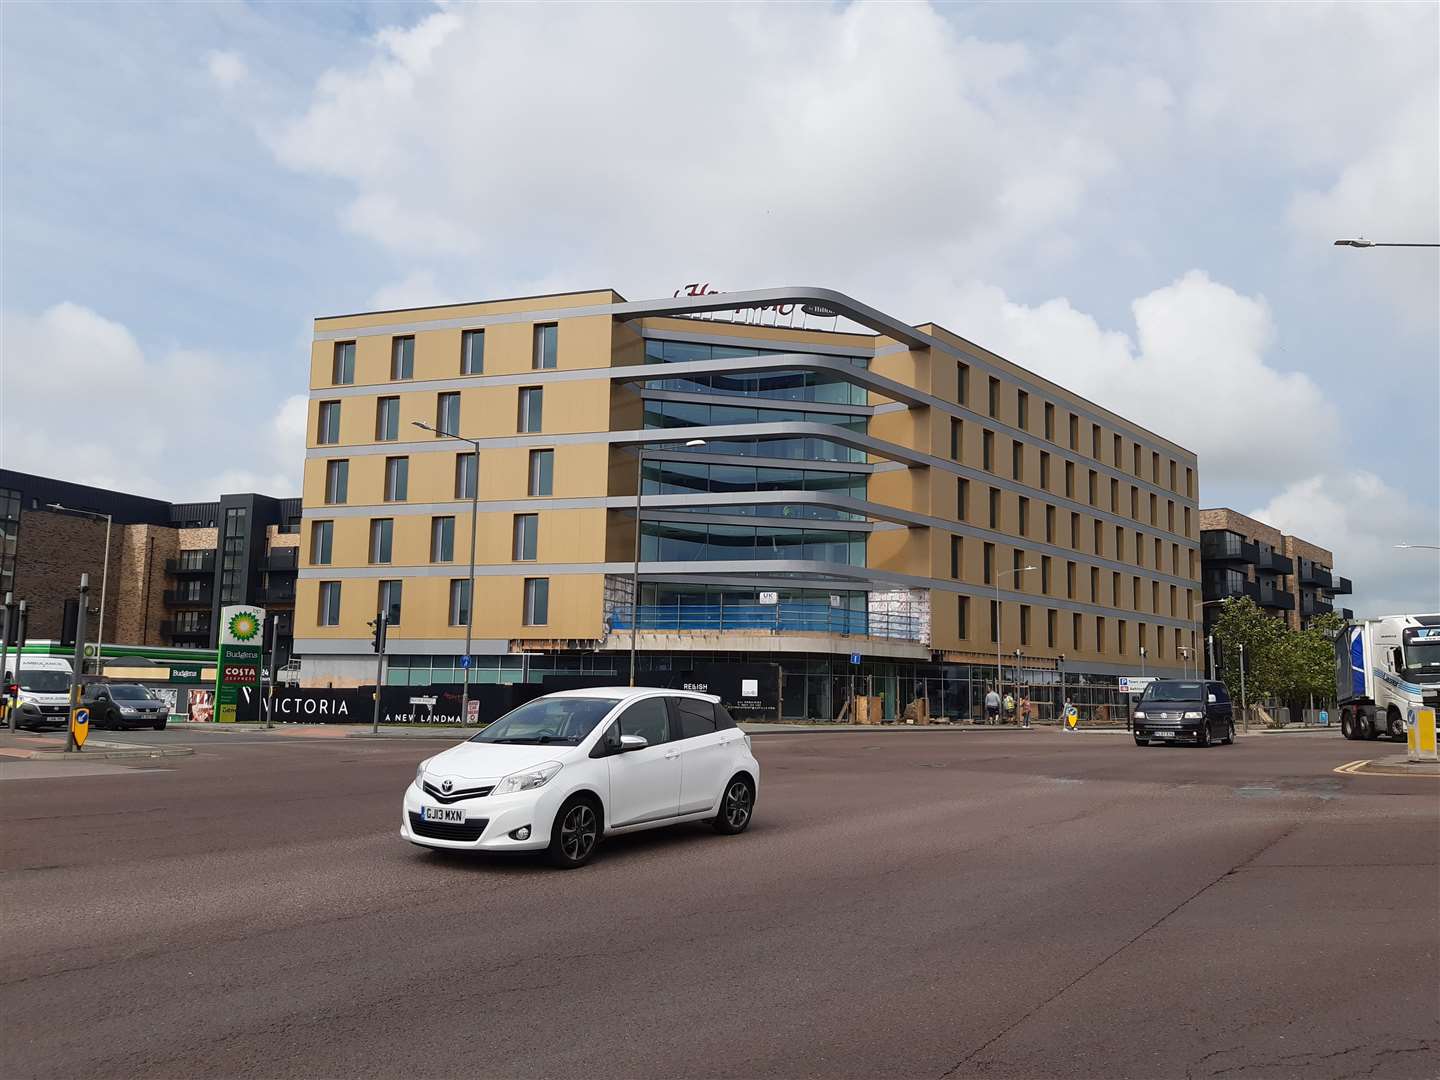 The 140-room hotel is on one of Ashford's busiest junctions